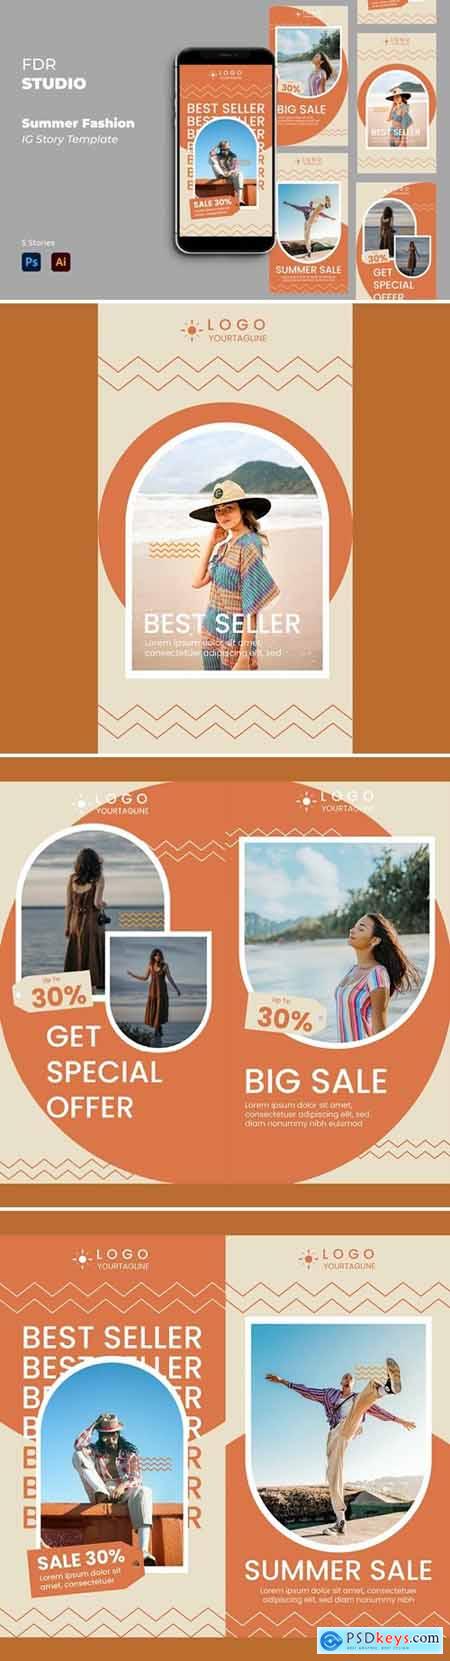 Summer Fashion Instagram Story Template